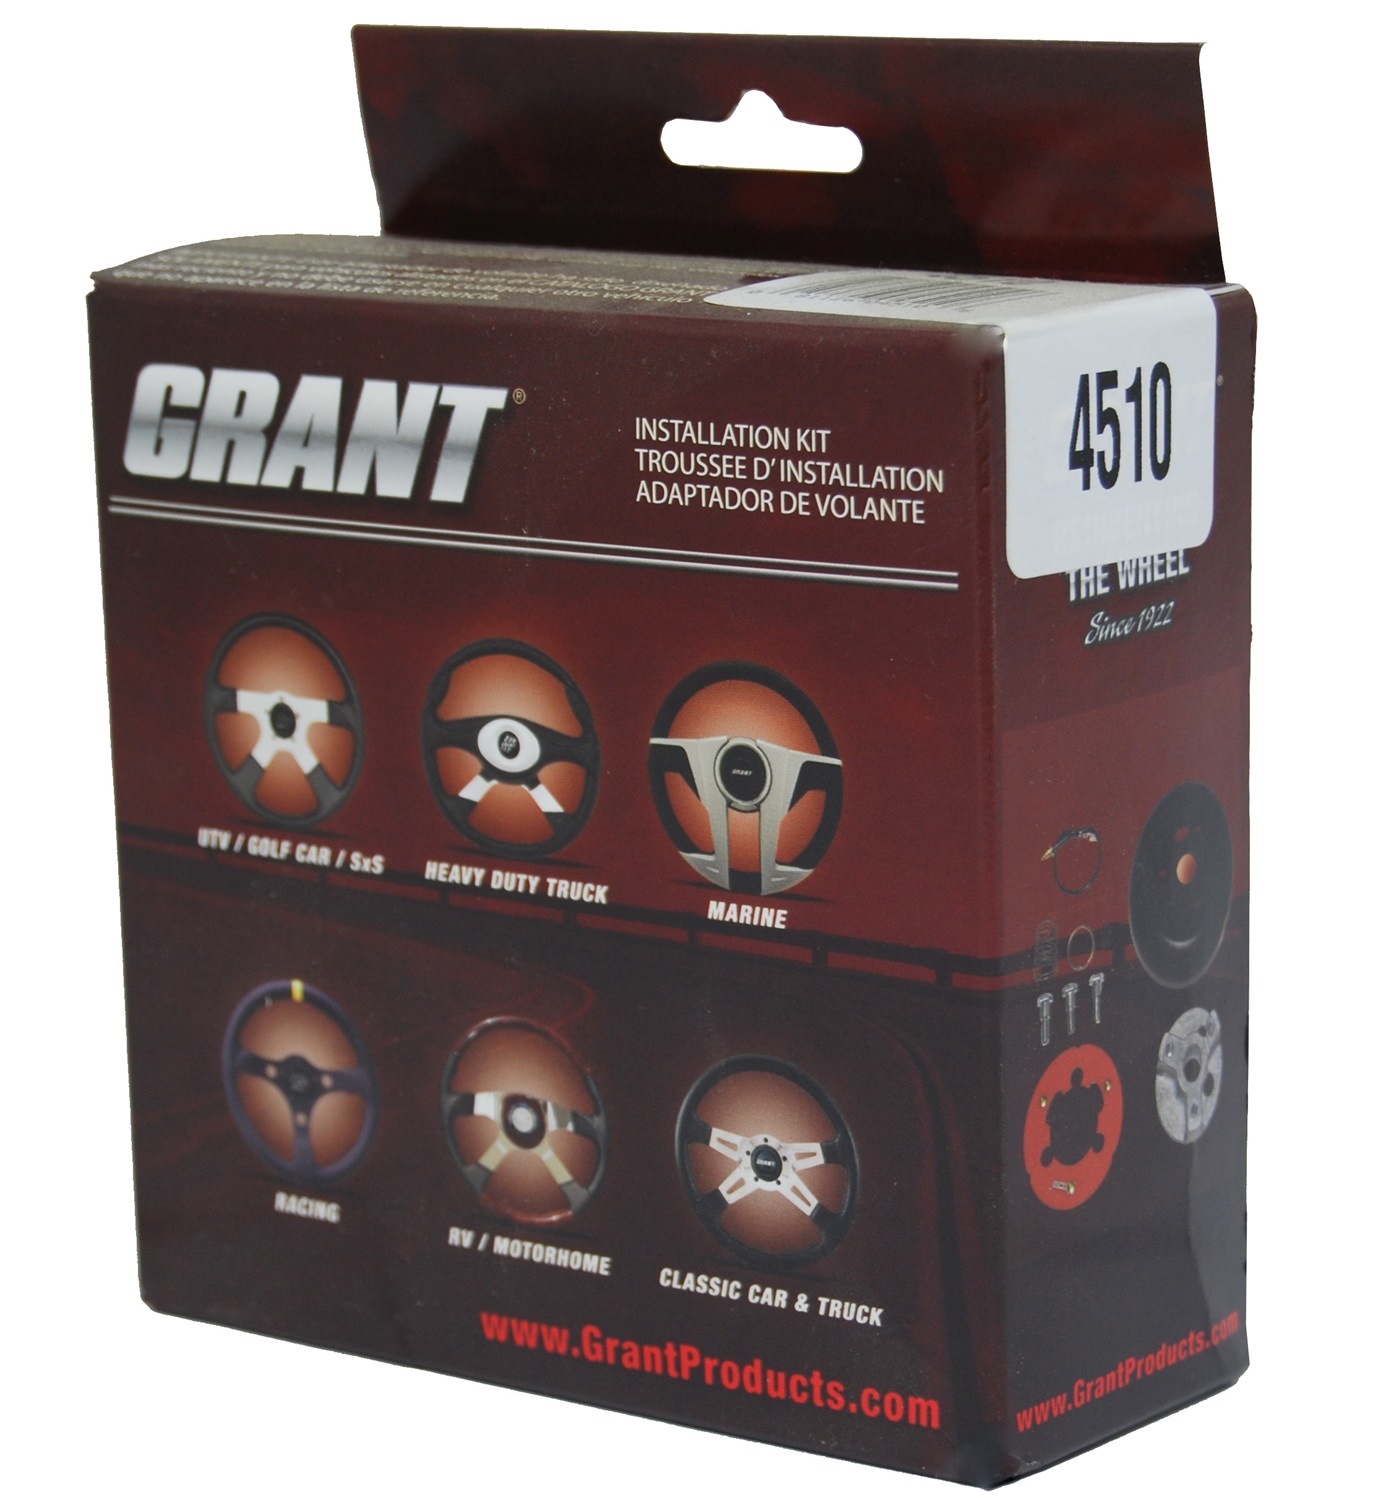 Grant 4510  Steering Wheel Installation Kit for All Grant Classic/Challenger/Signature Series Steering Wheels 